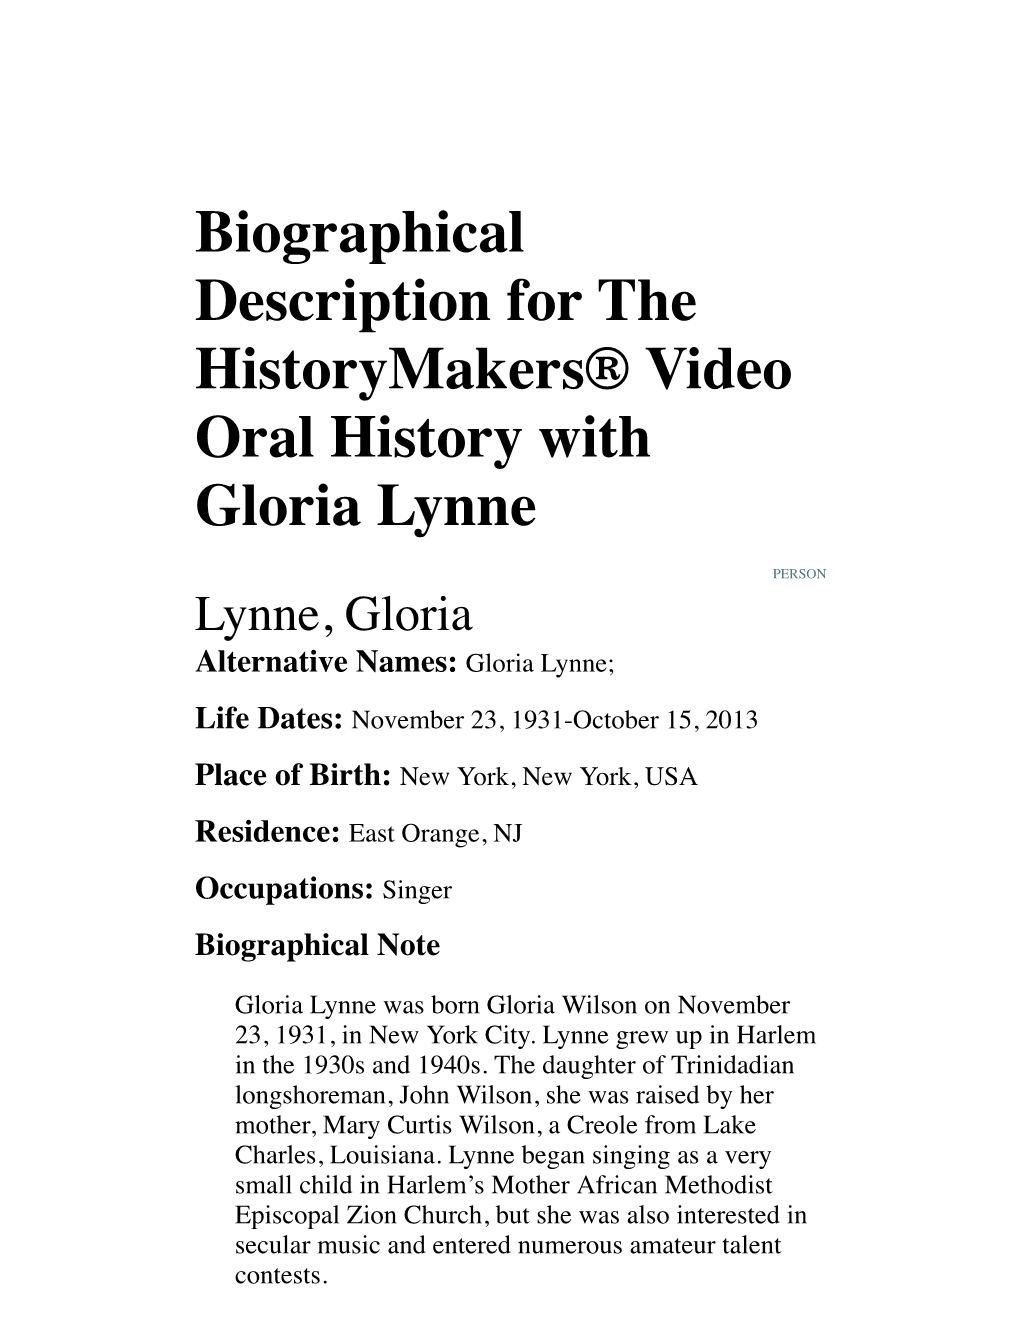 Biographical Description for the Historymakers® Video Oral History with Gloria Lynne